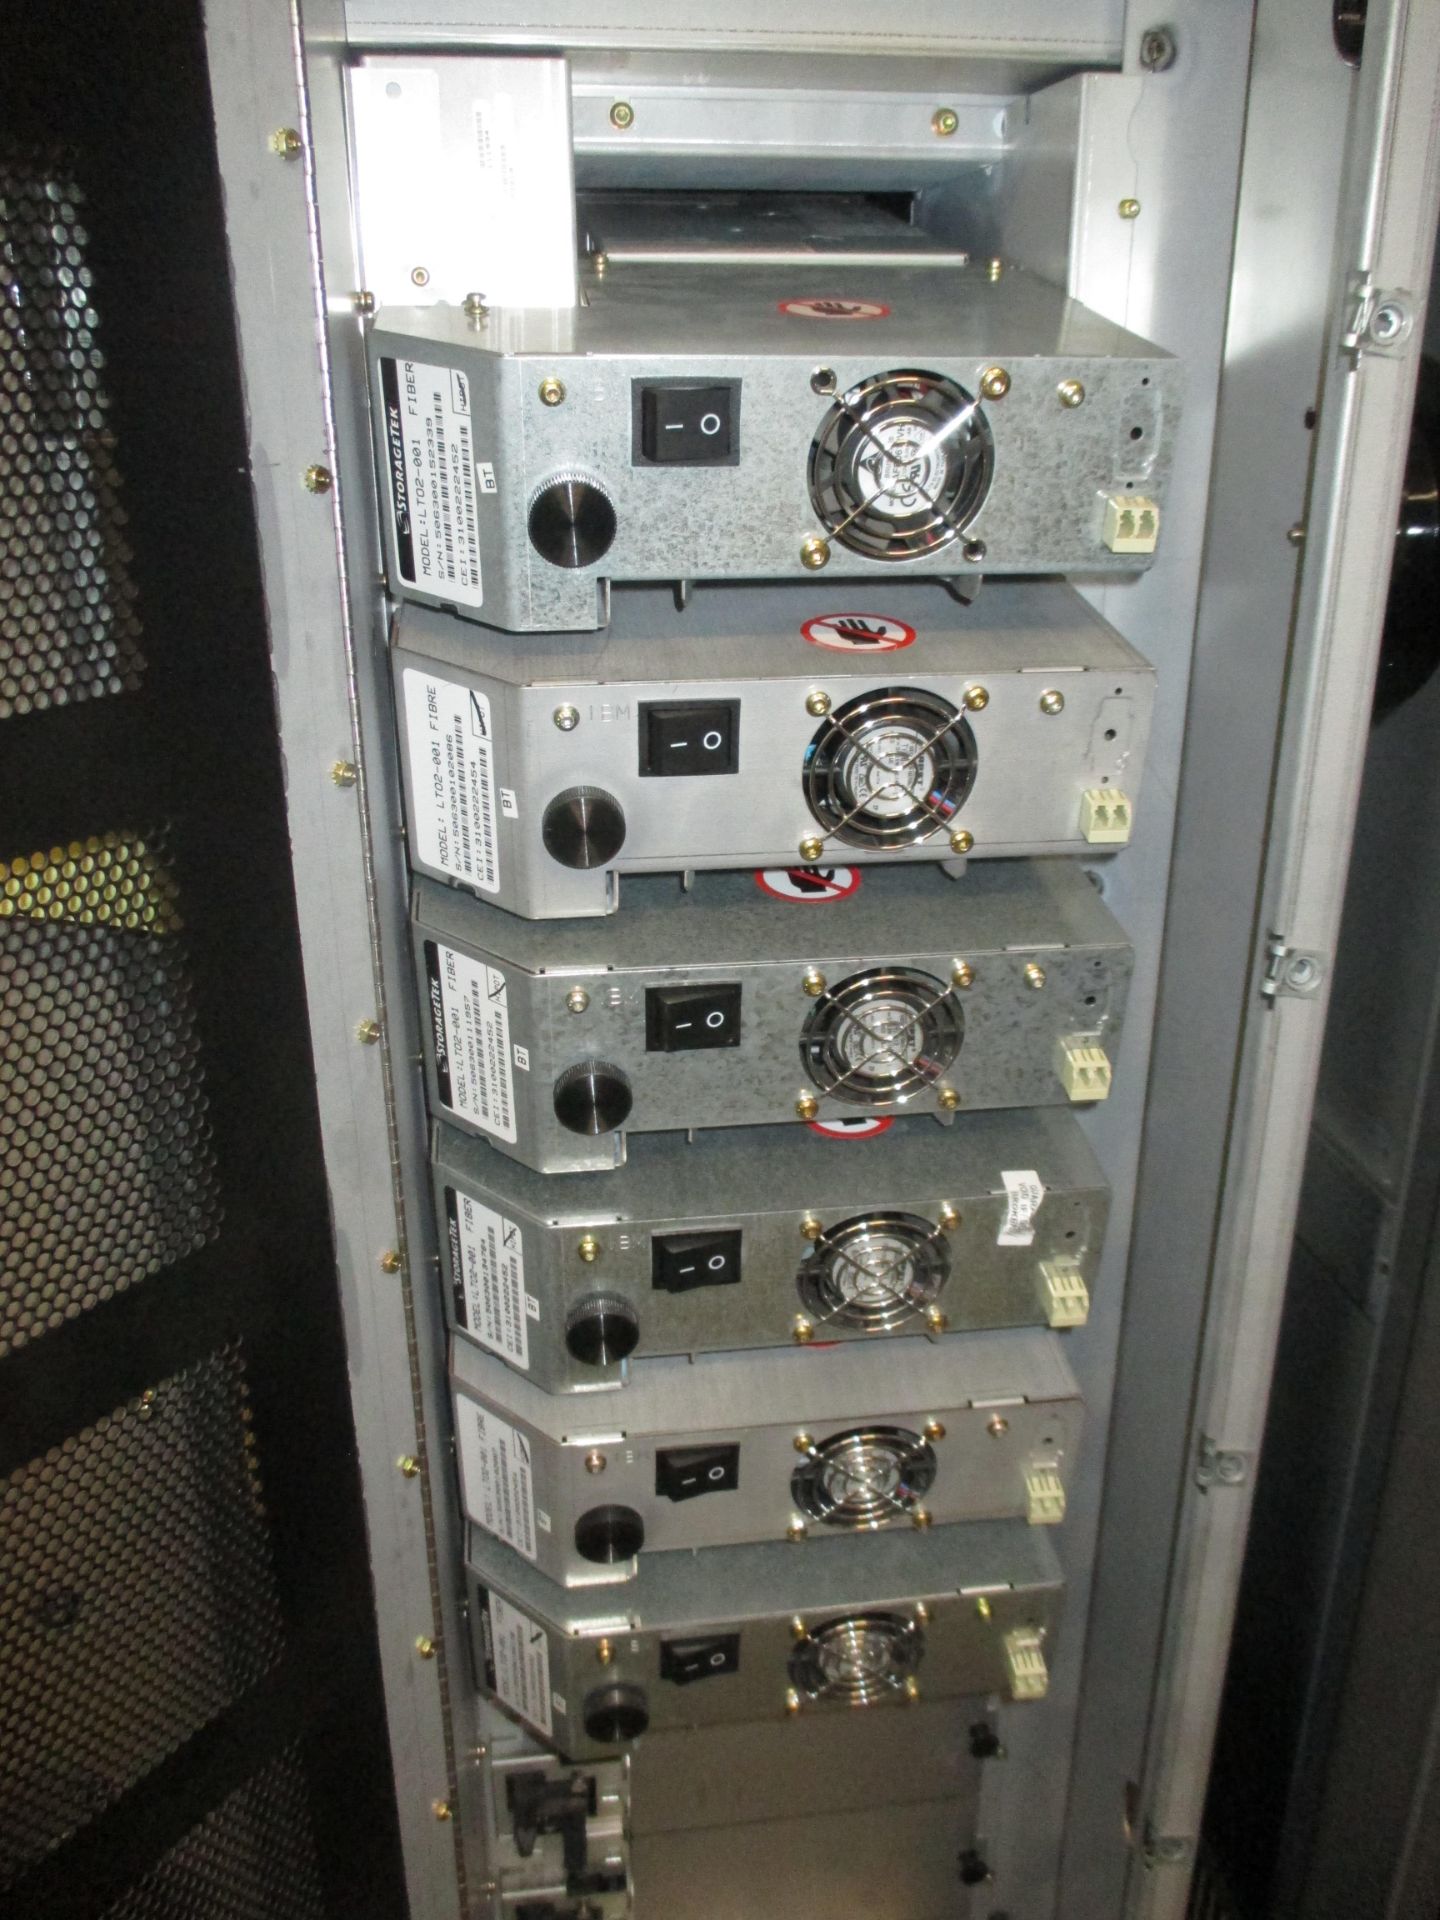 STORAGE TEK L180 TAPE LIBRARY CONTAINING 6 X 1BM LTO2-OO1 FIBER TAPE DRIVES. WITH KEY - Image 6 of 8